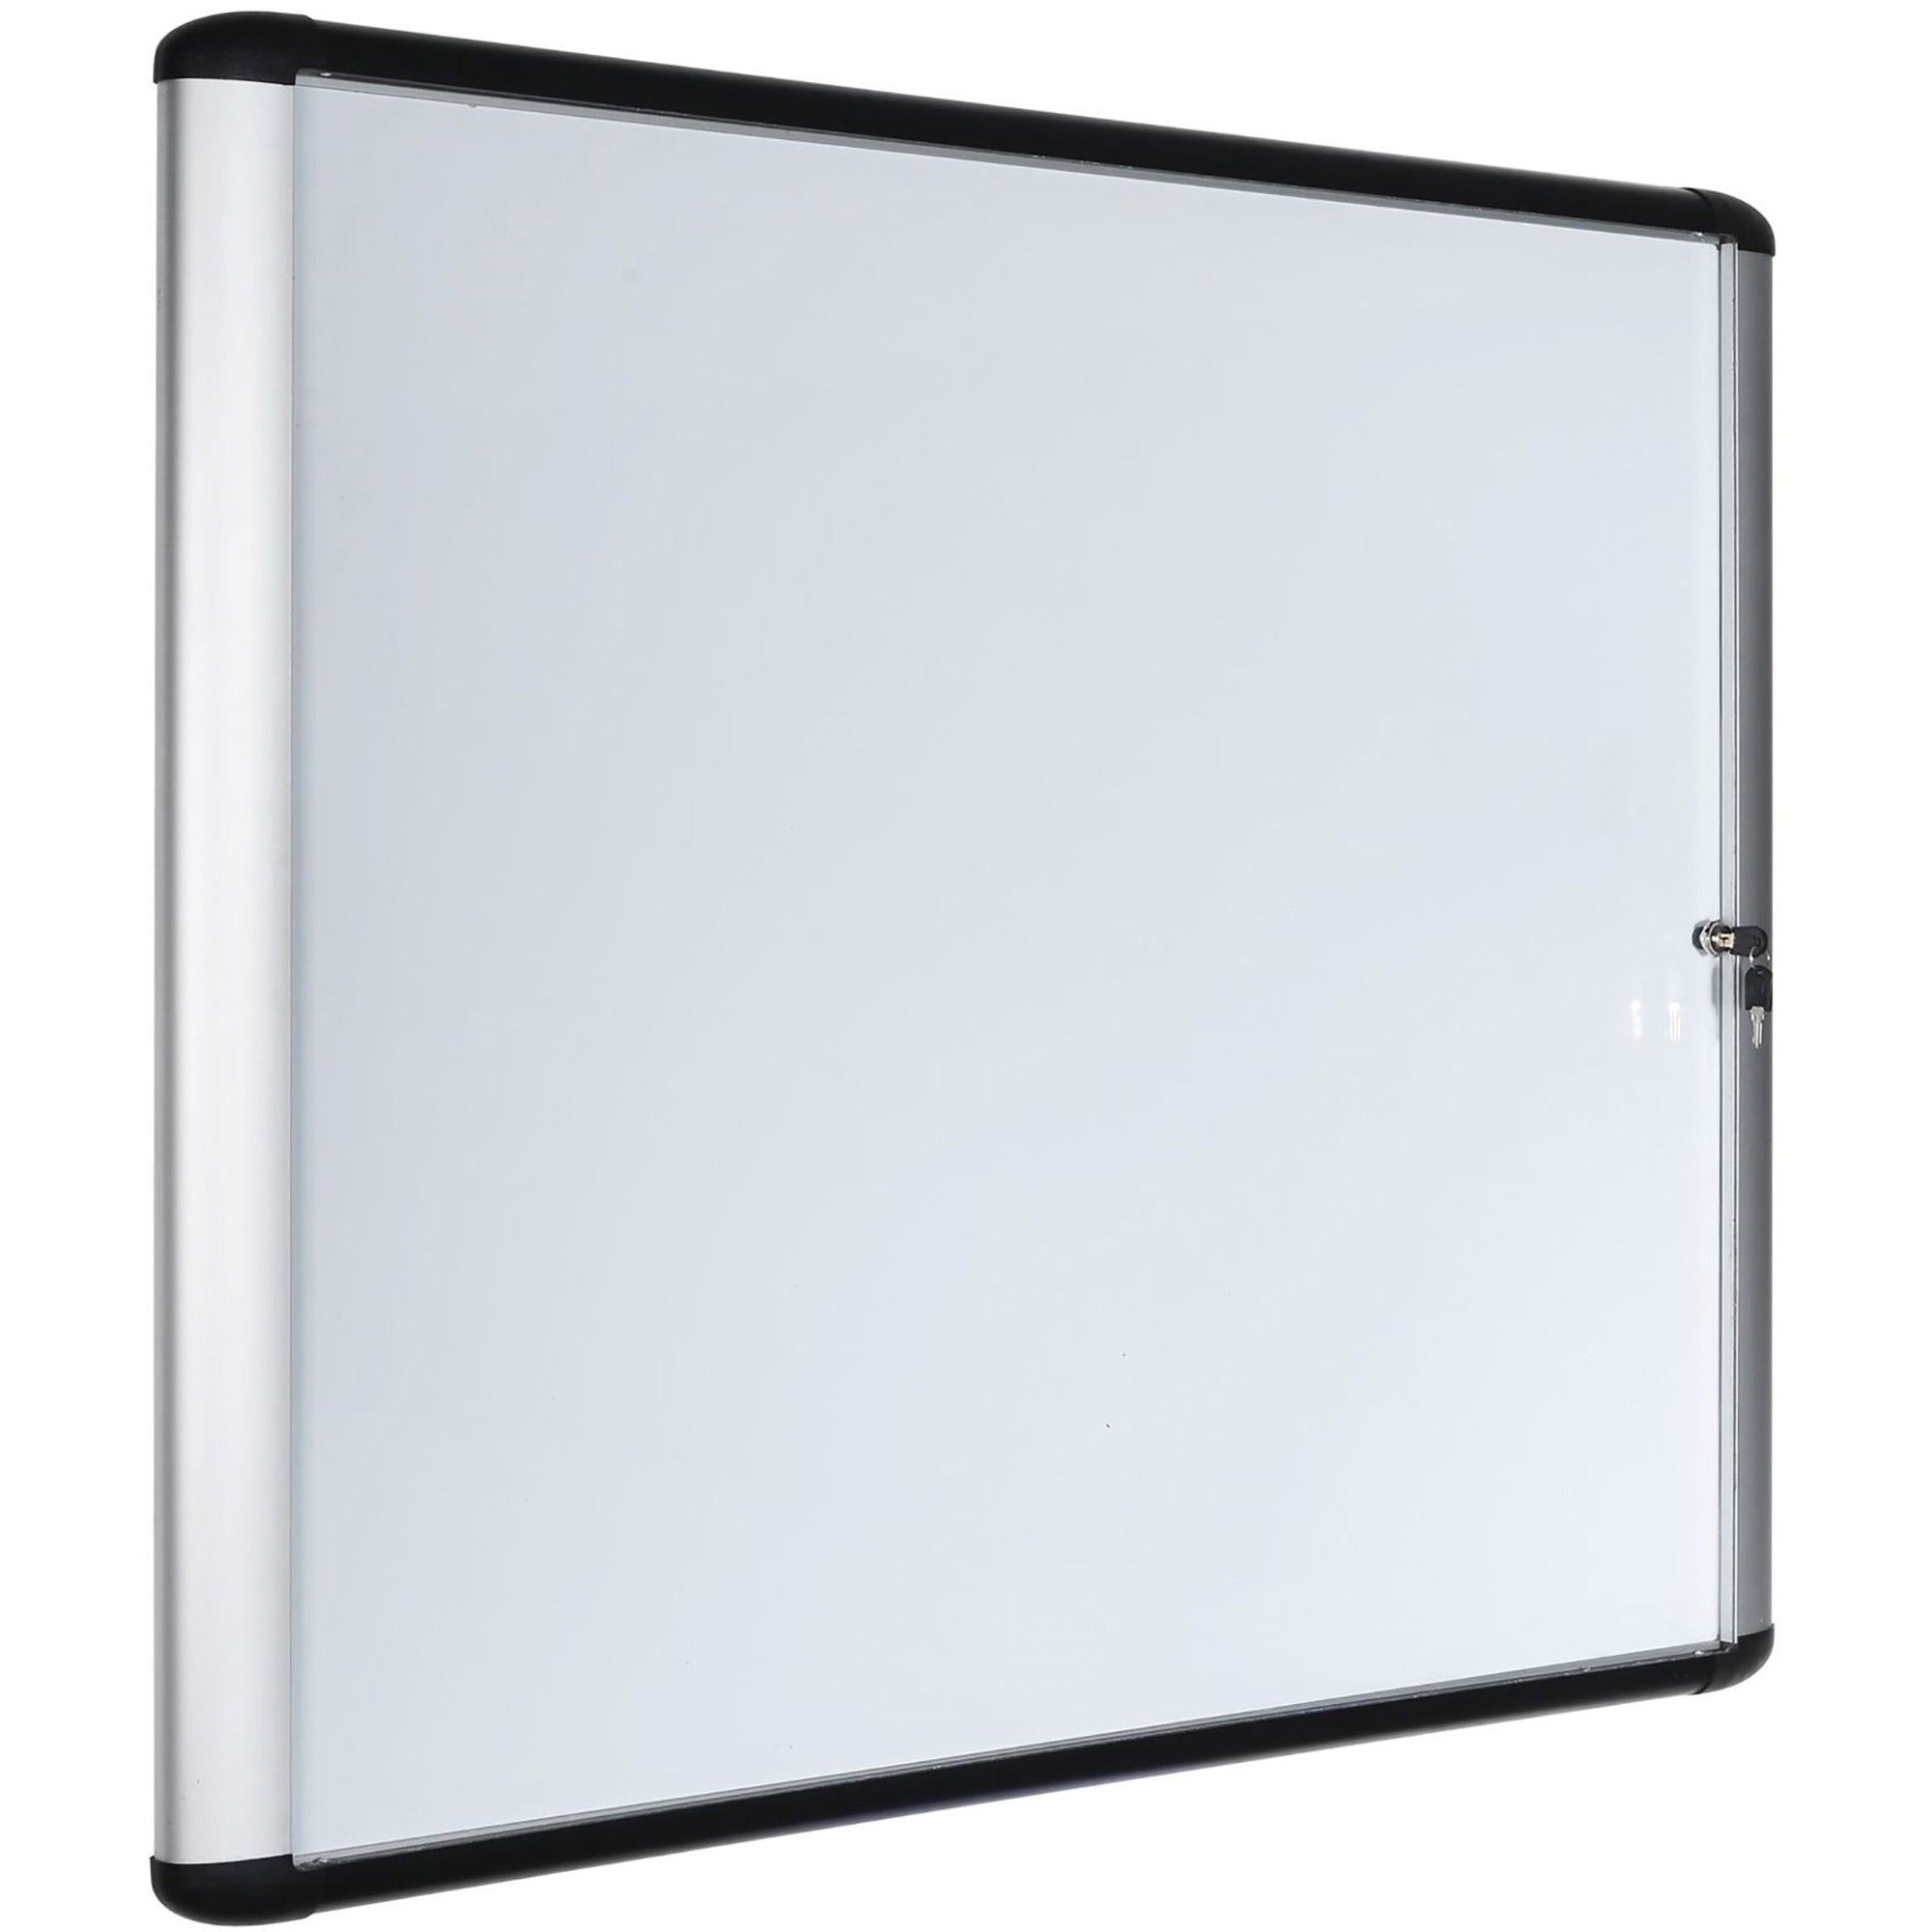 mastervision-swing-door-enclosed-dry-erase-board-39-33-ft-width-x-48-4-ft-height-white-porcelain-steel-surface-aluminum-frame-rectangle-magnetic-1-each_bvcvt640209650 - 1